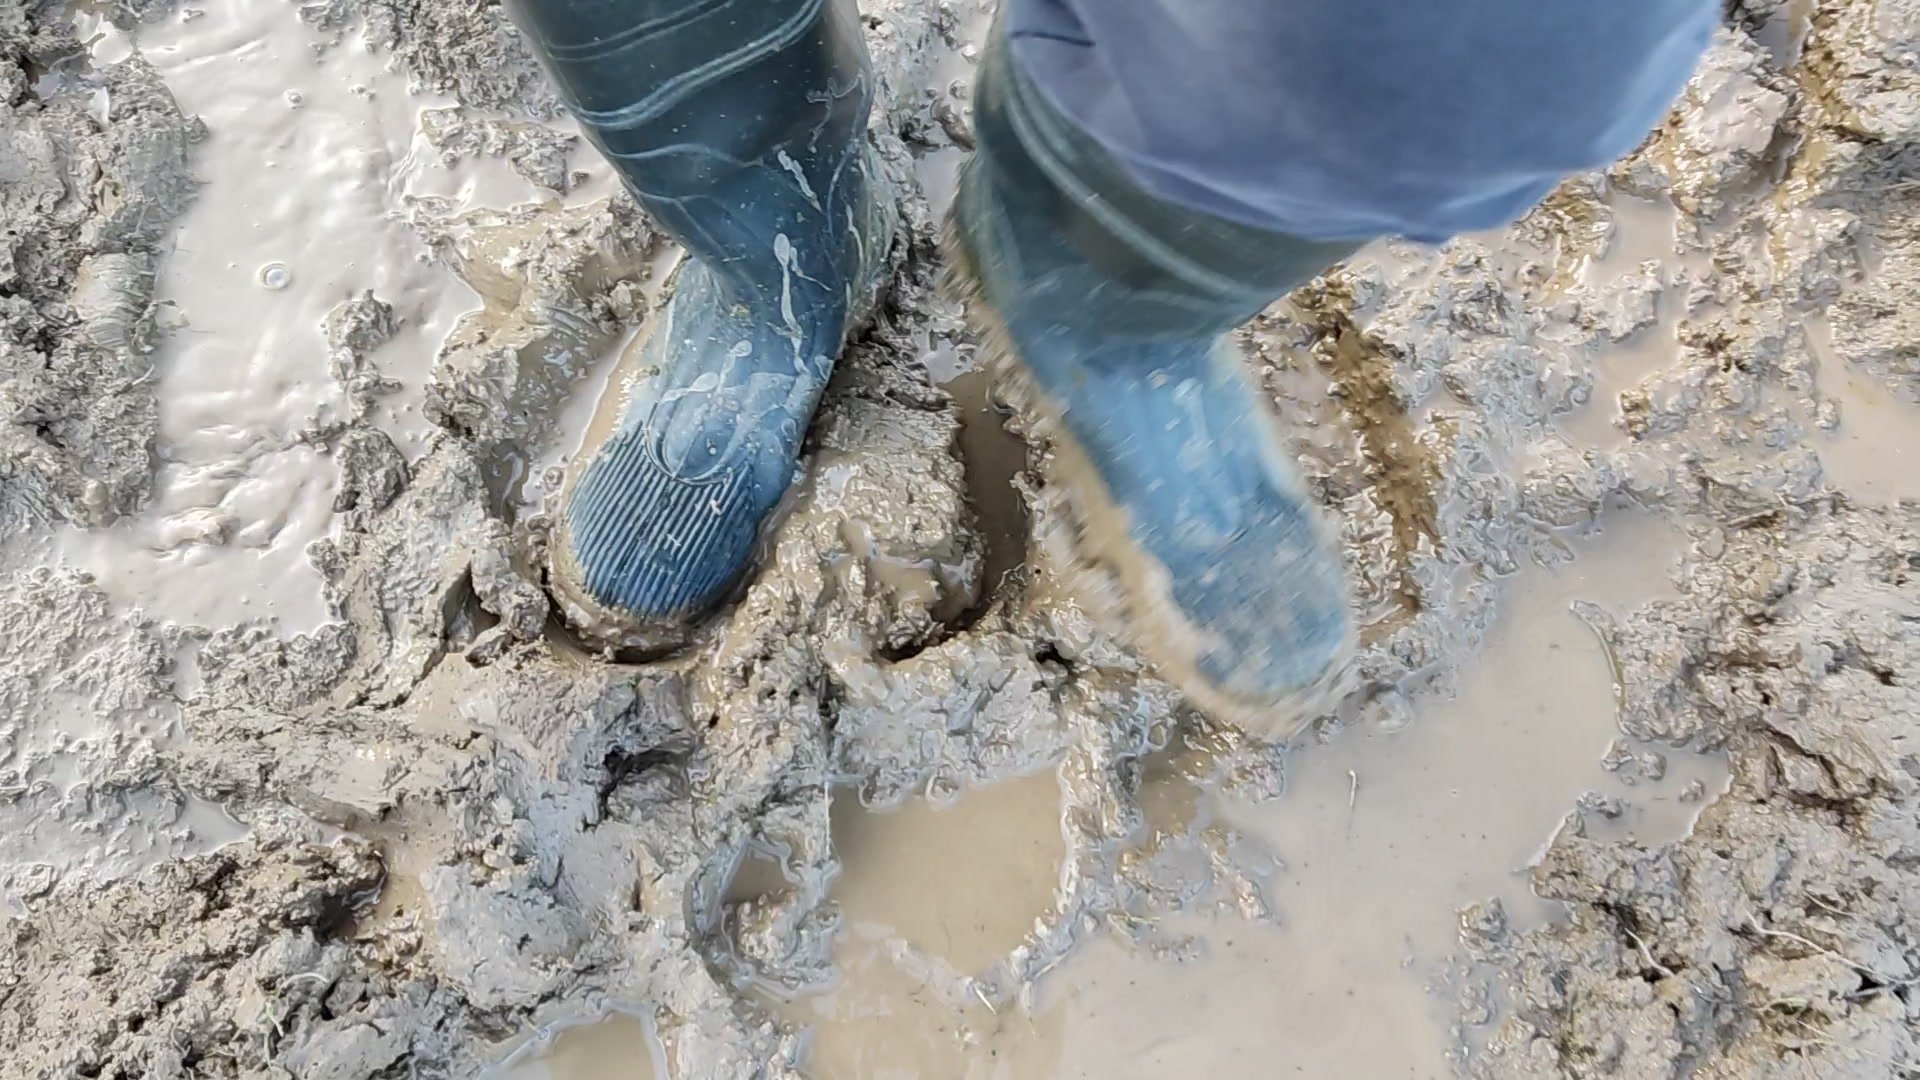 Rubber boots in mud - video 9